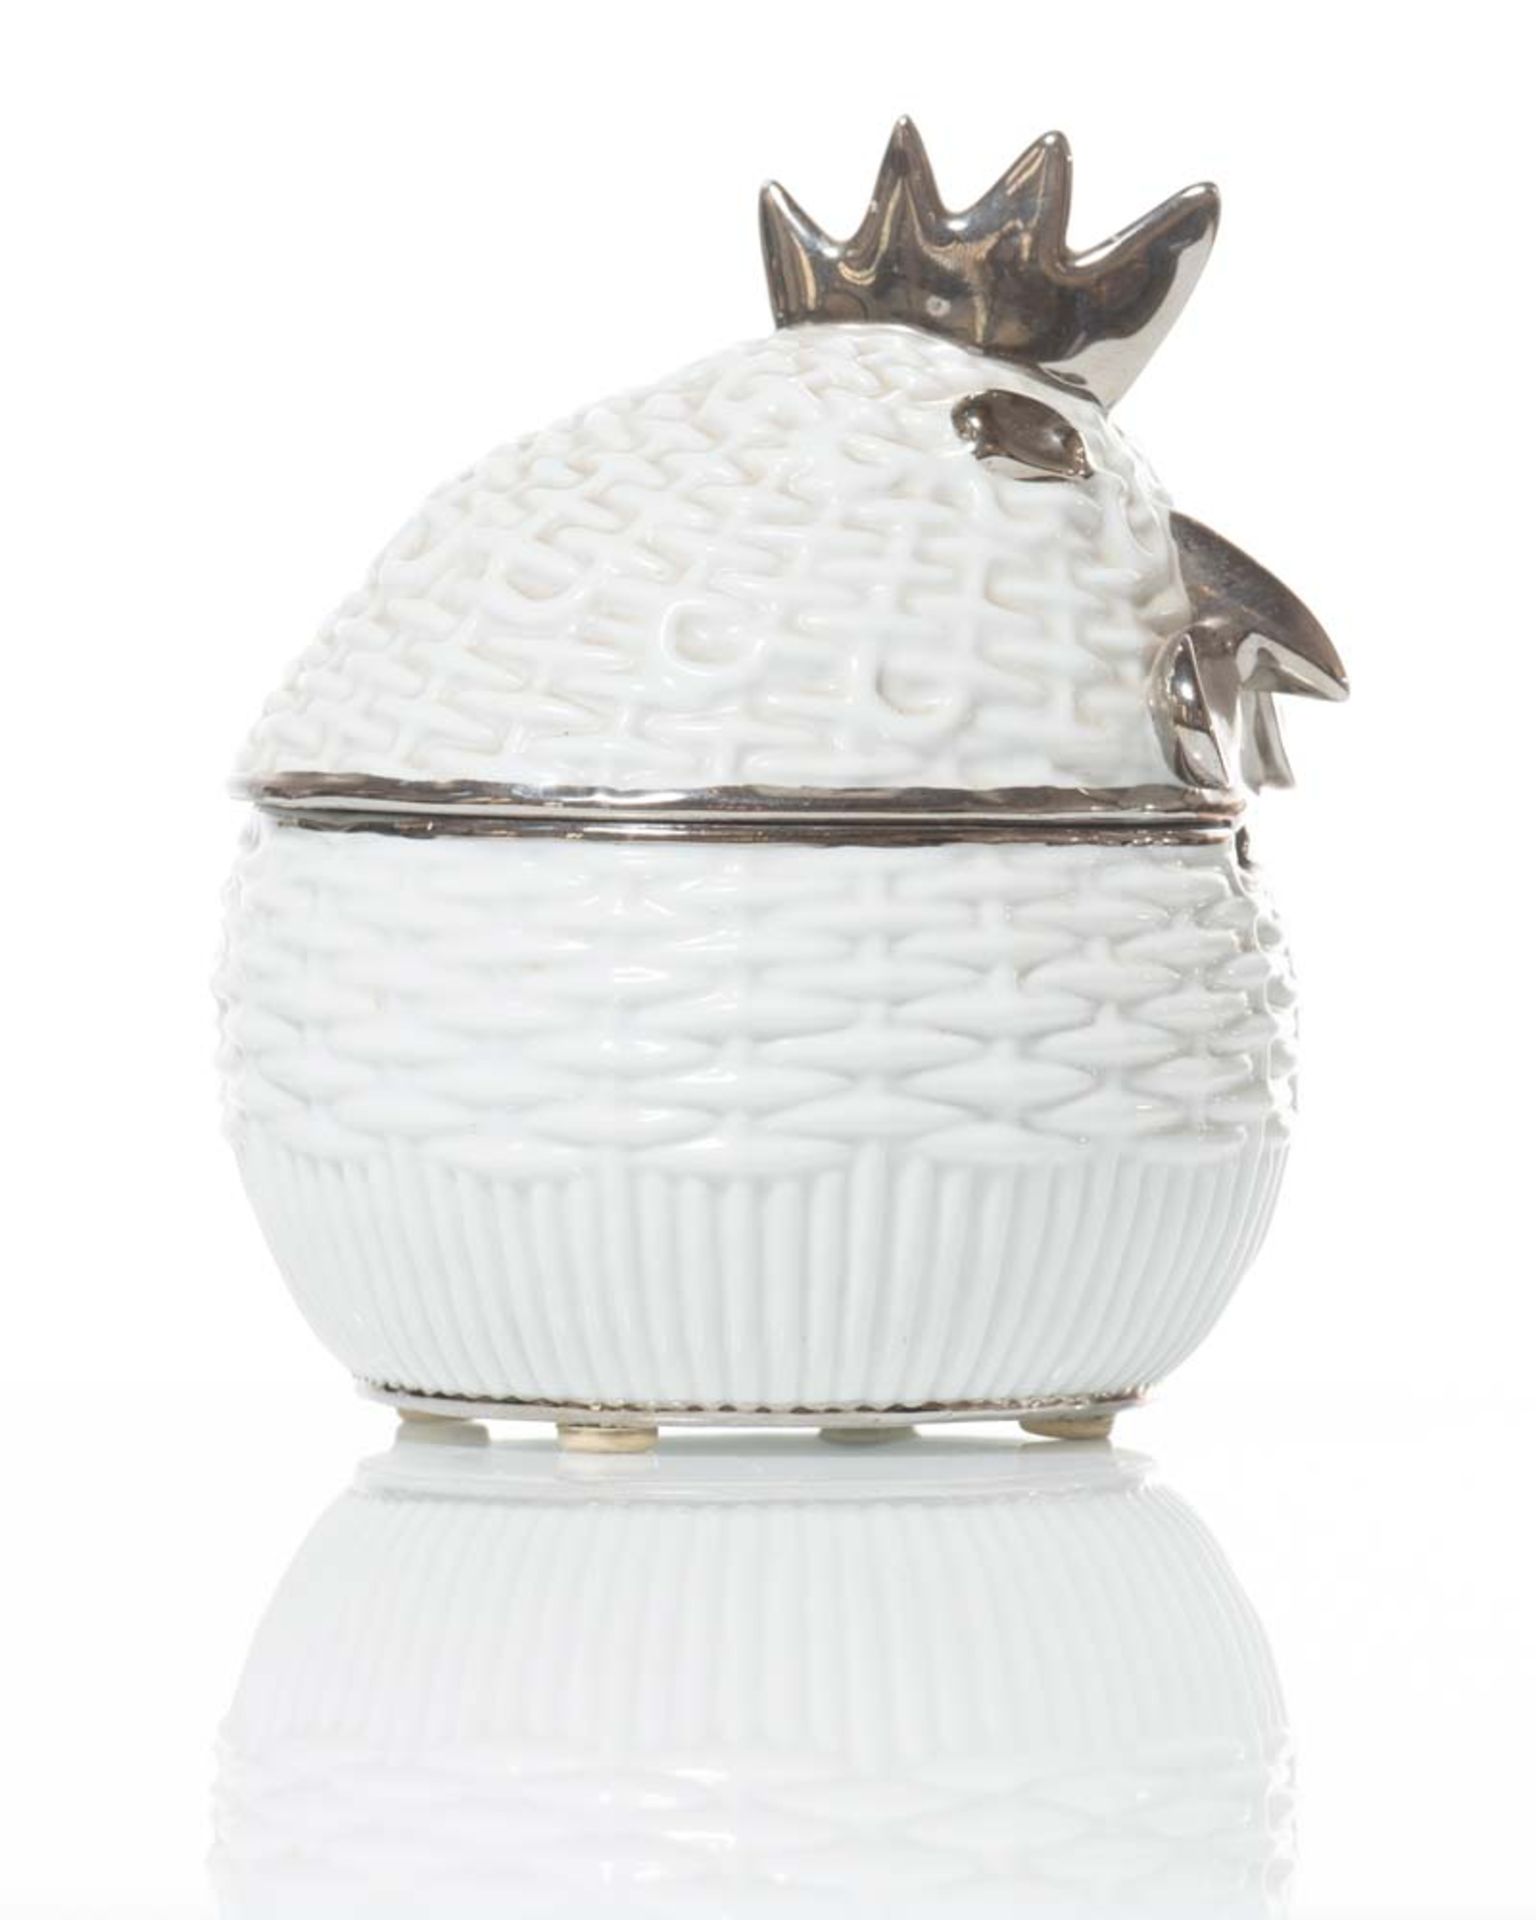 White and silver porcelain box, "Gallina", Italy, 80s. - Image 2 of 2